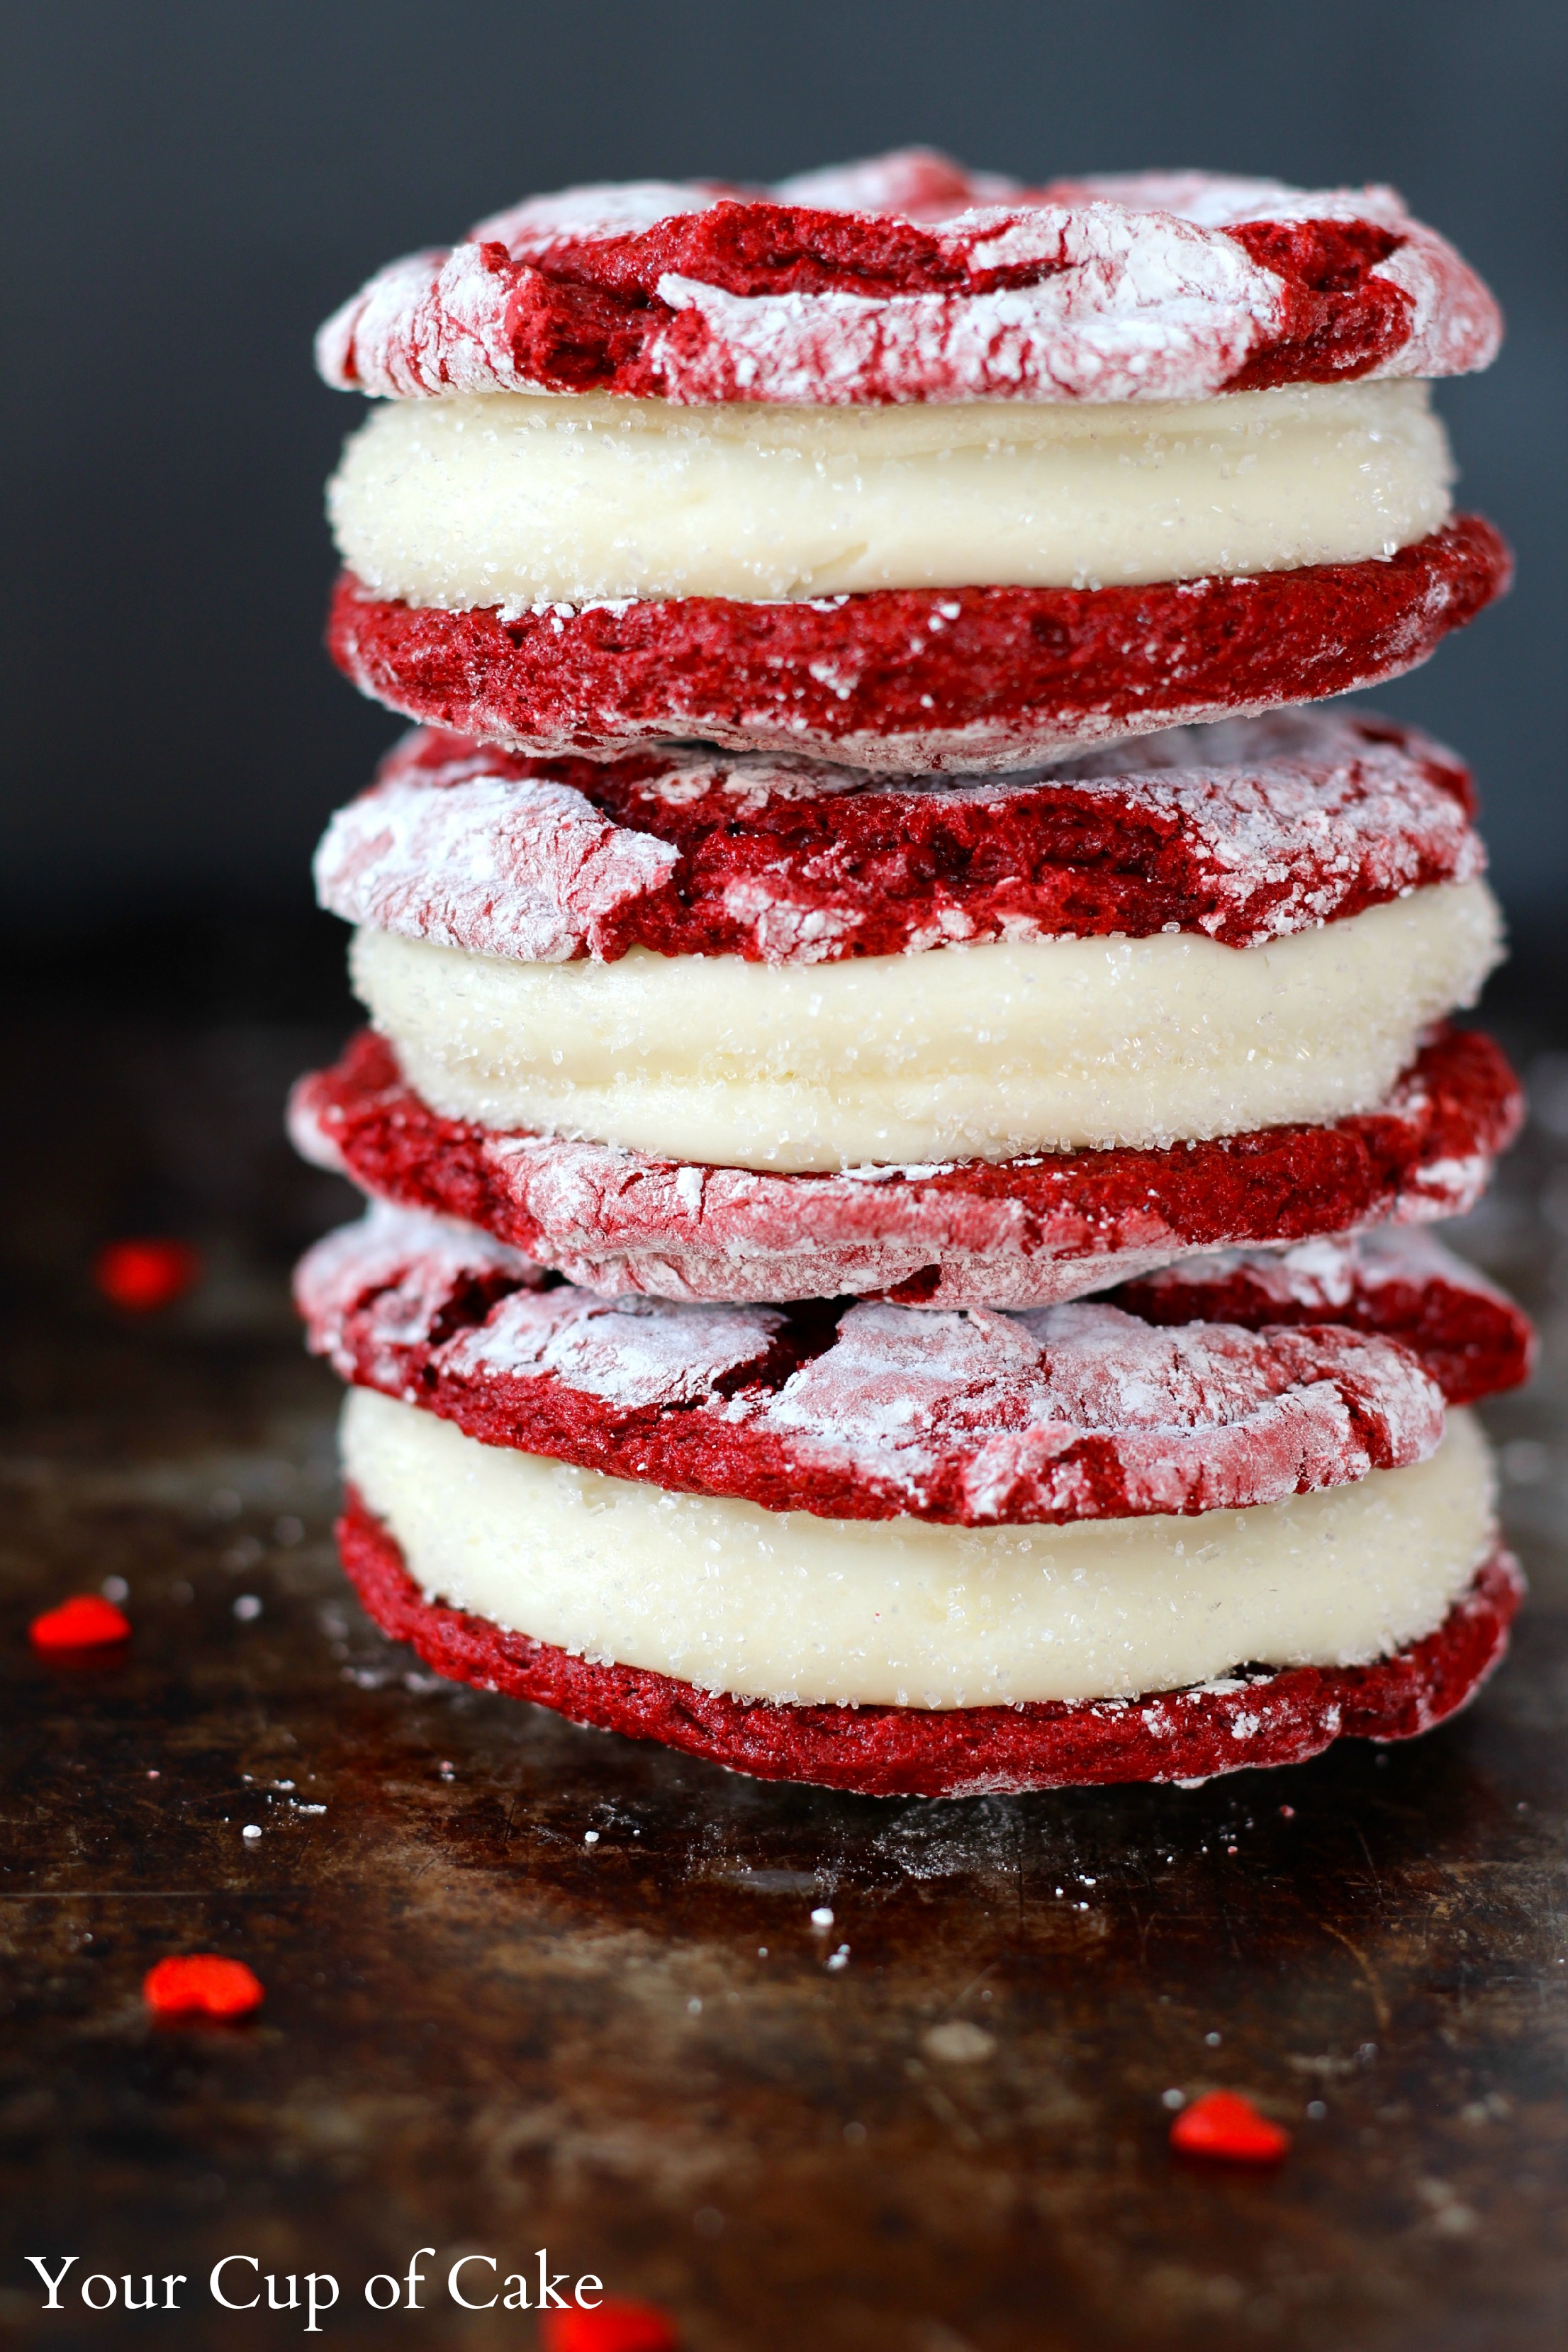 Red Velvet Cookies with Cream Cheese Chips : r/Baking